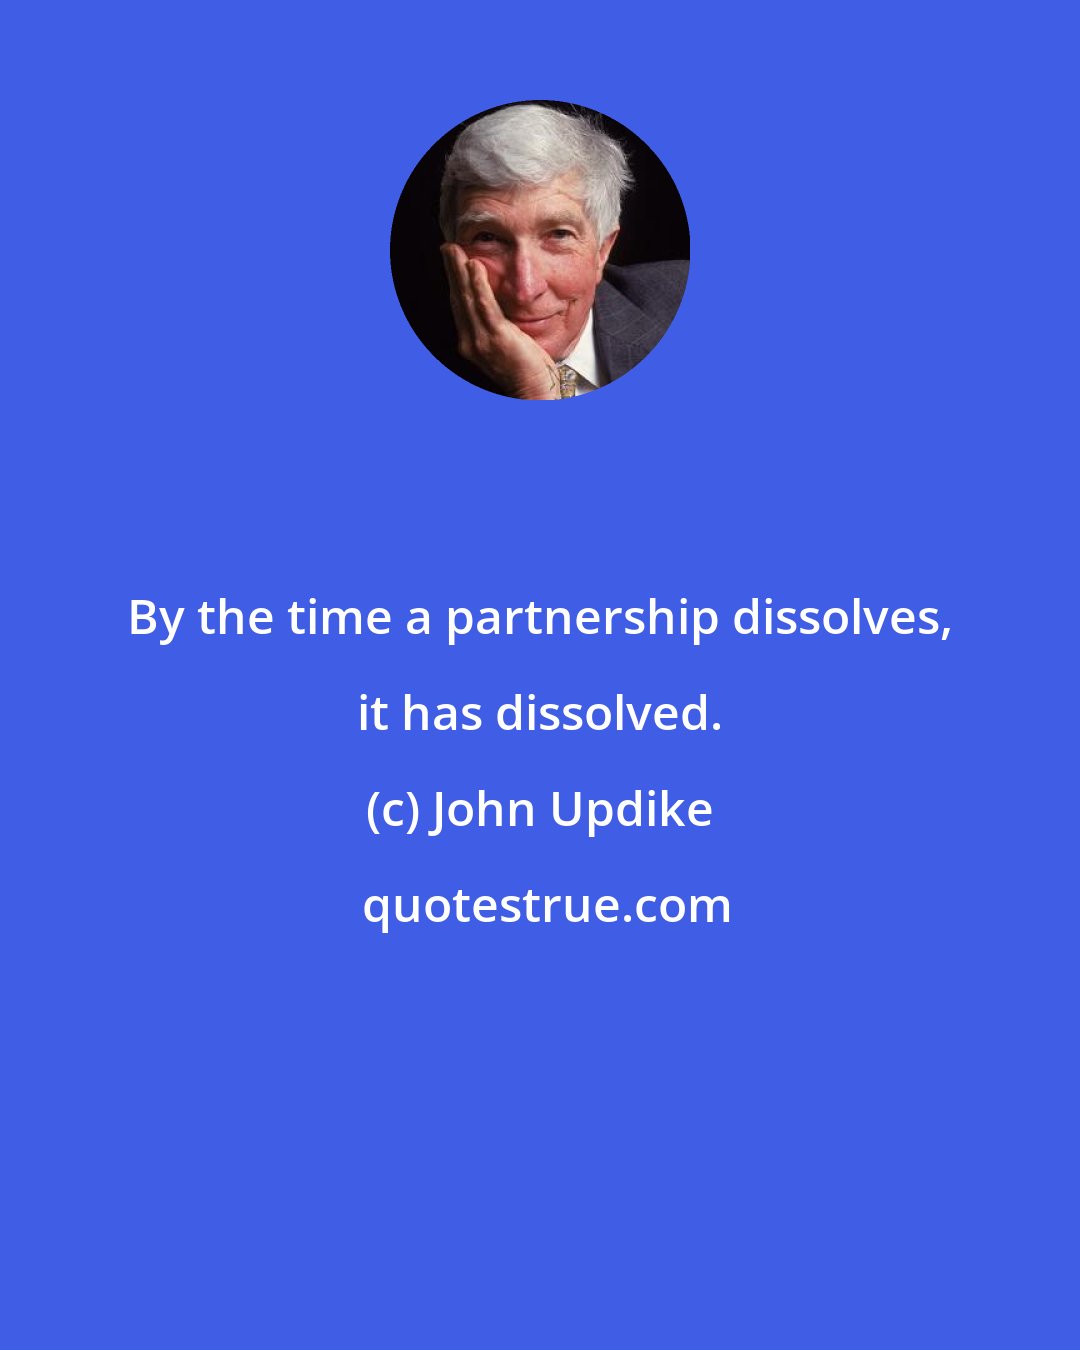 John Updike: By the time a partnership dissolves, it has dissolved.